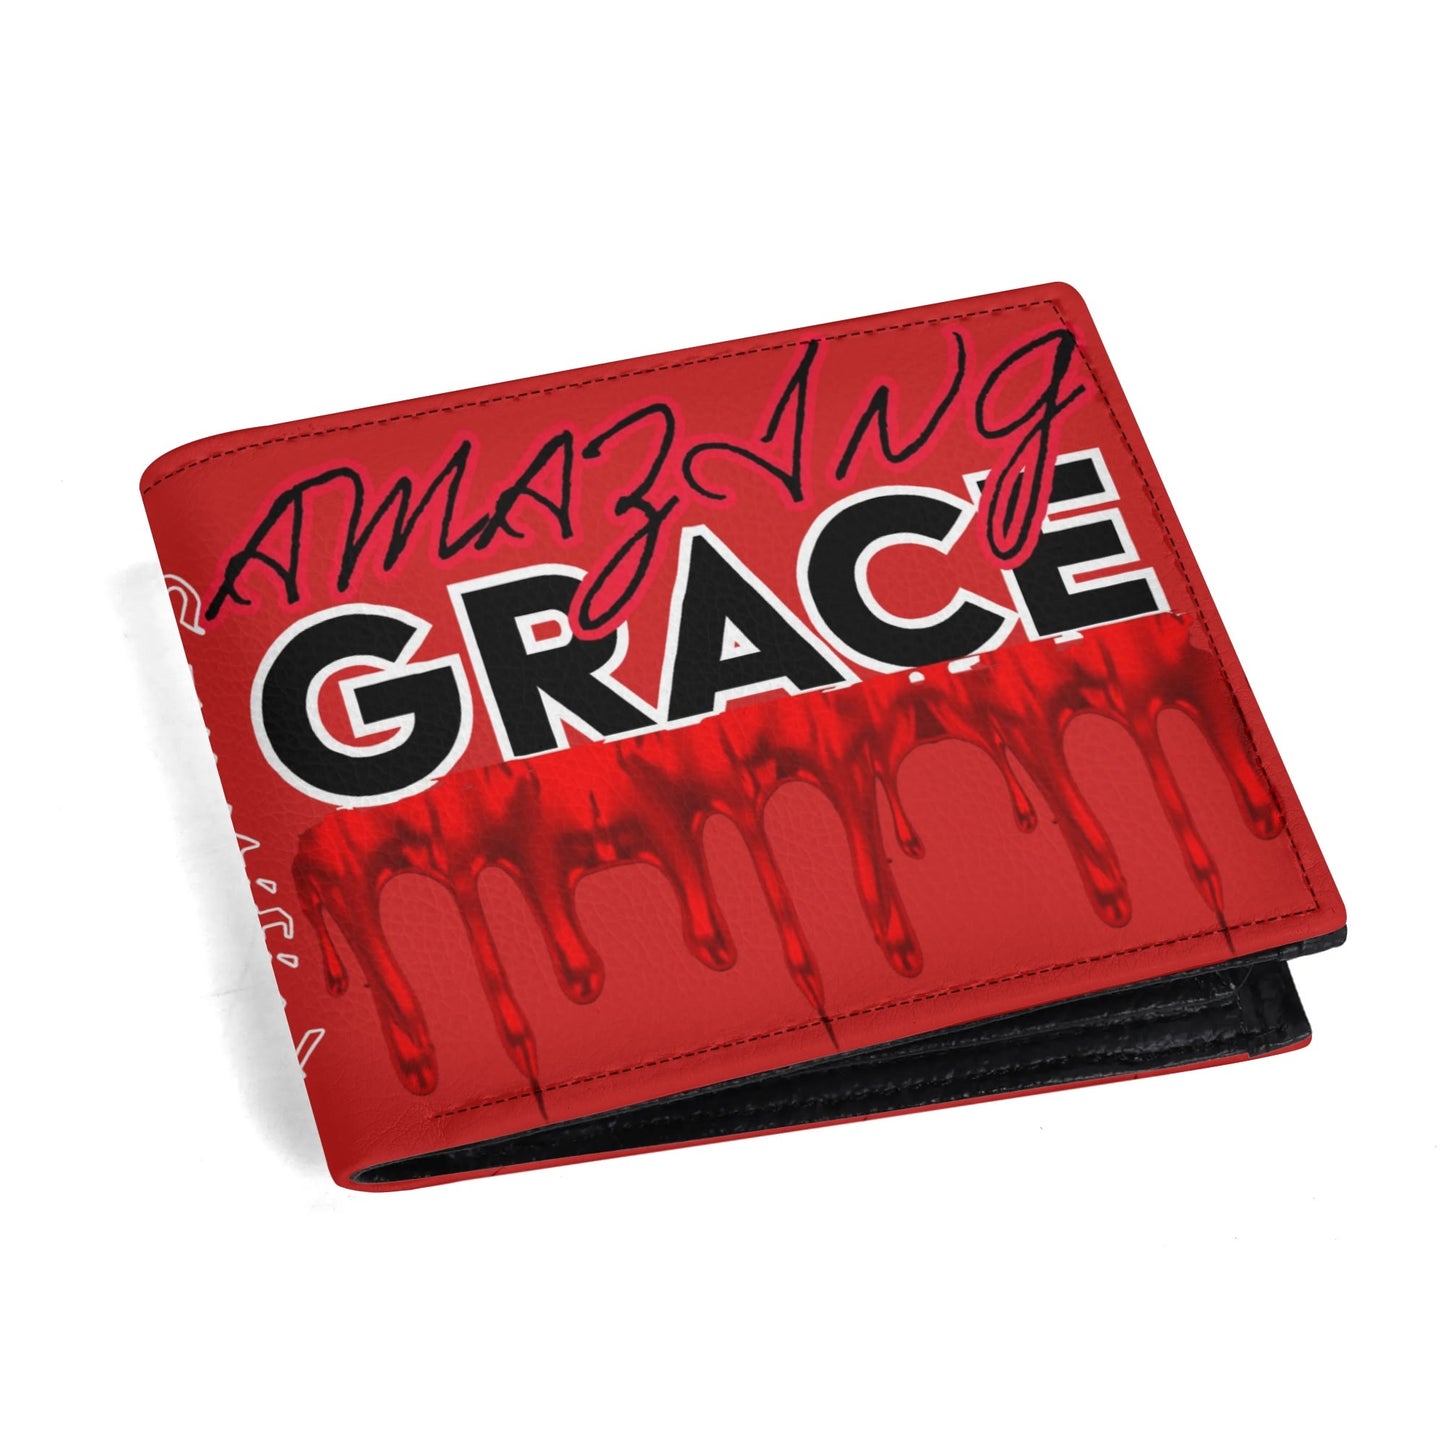 AMAZING GRACE- PU Leather Wallet Paper Folded Wallet, FREE SHIPPING